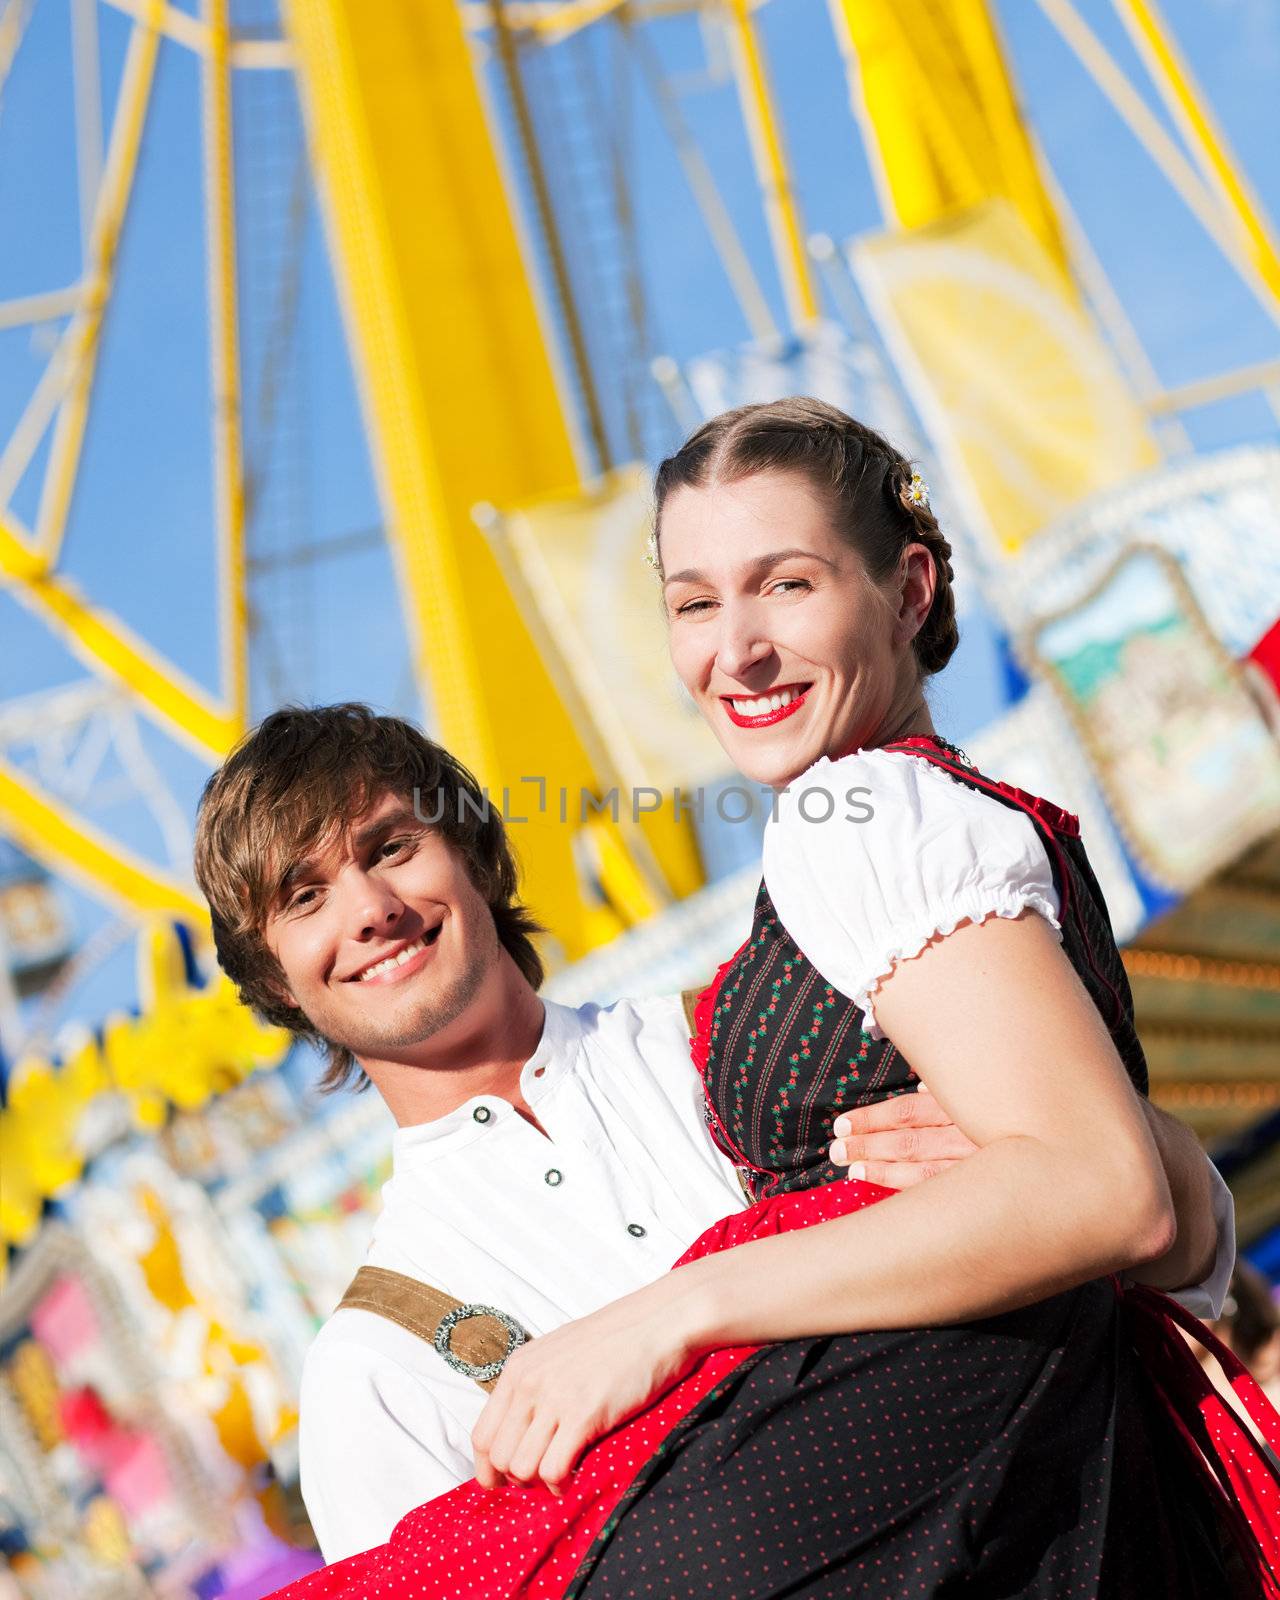 Couple in Tracht flirting at big wheel by Kzenon